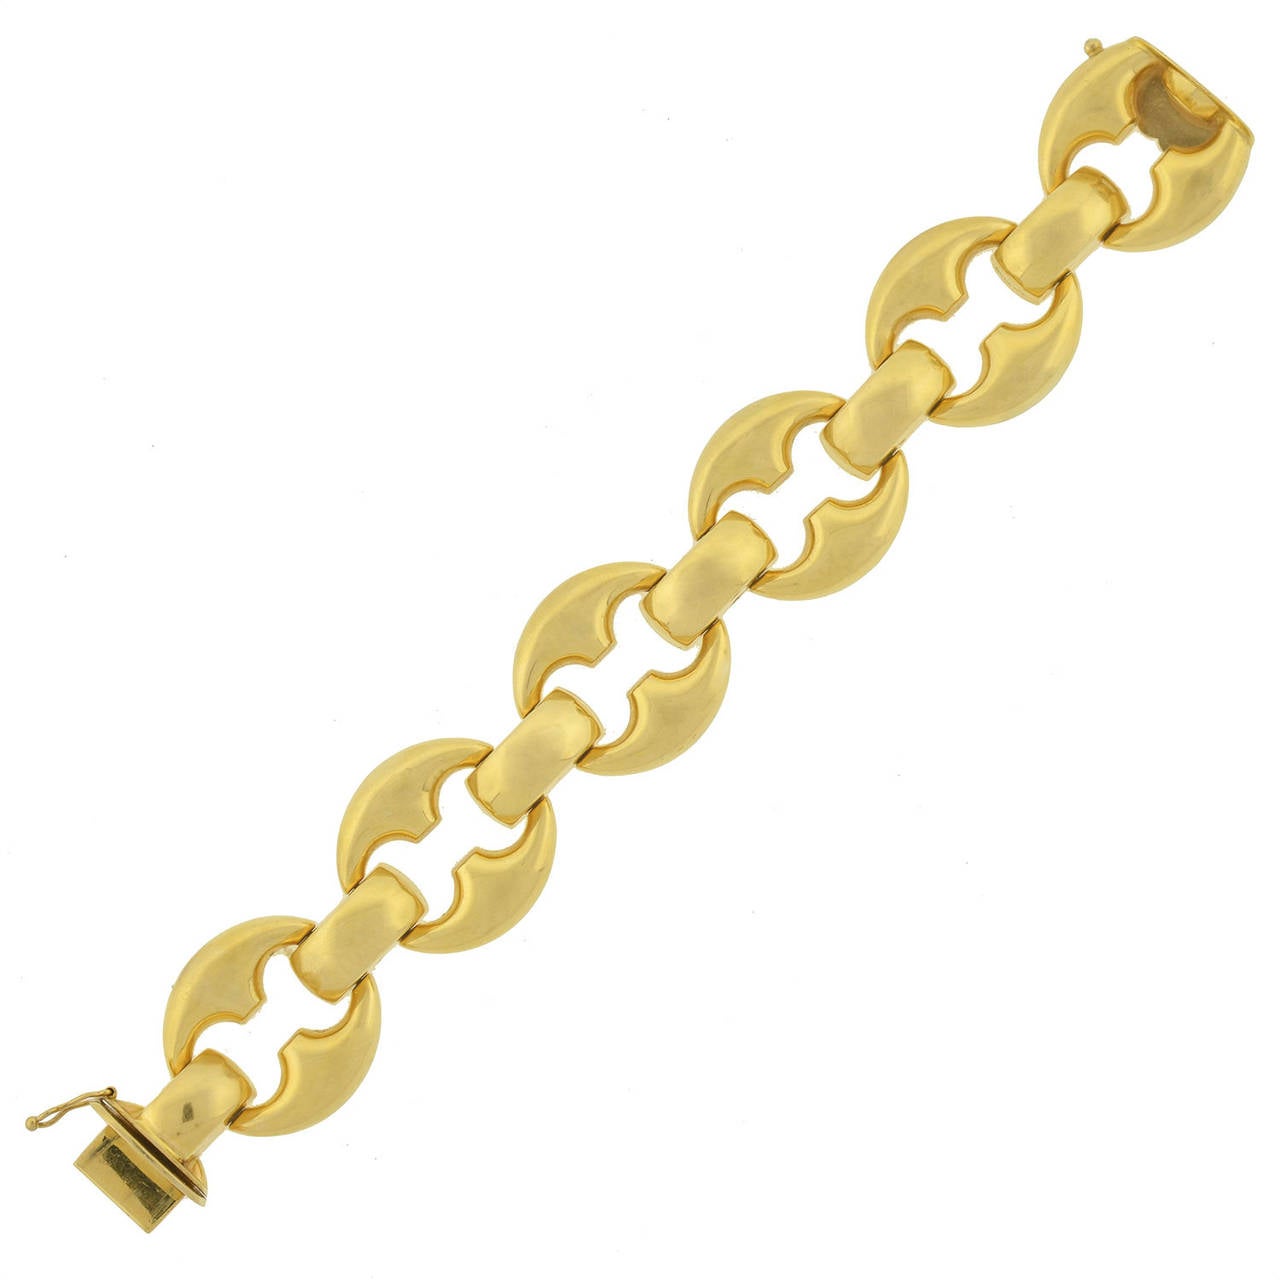 An absolutely fabulous Vintage gold link bracelet from the 1960's! This fashionable piece is made of vibrant 18kt yellow gold and comprised of large Gucci style links that alternate with complimentary gold connector links. The bracelet opens and